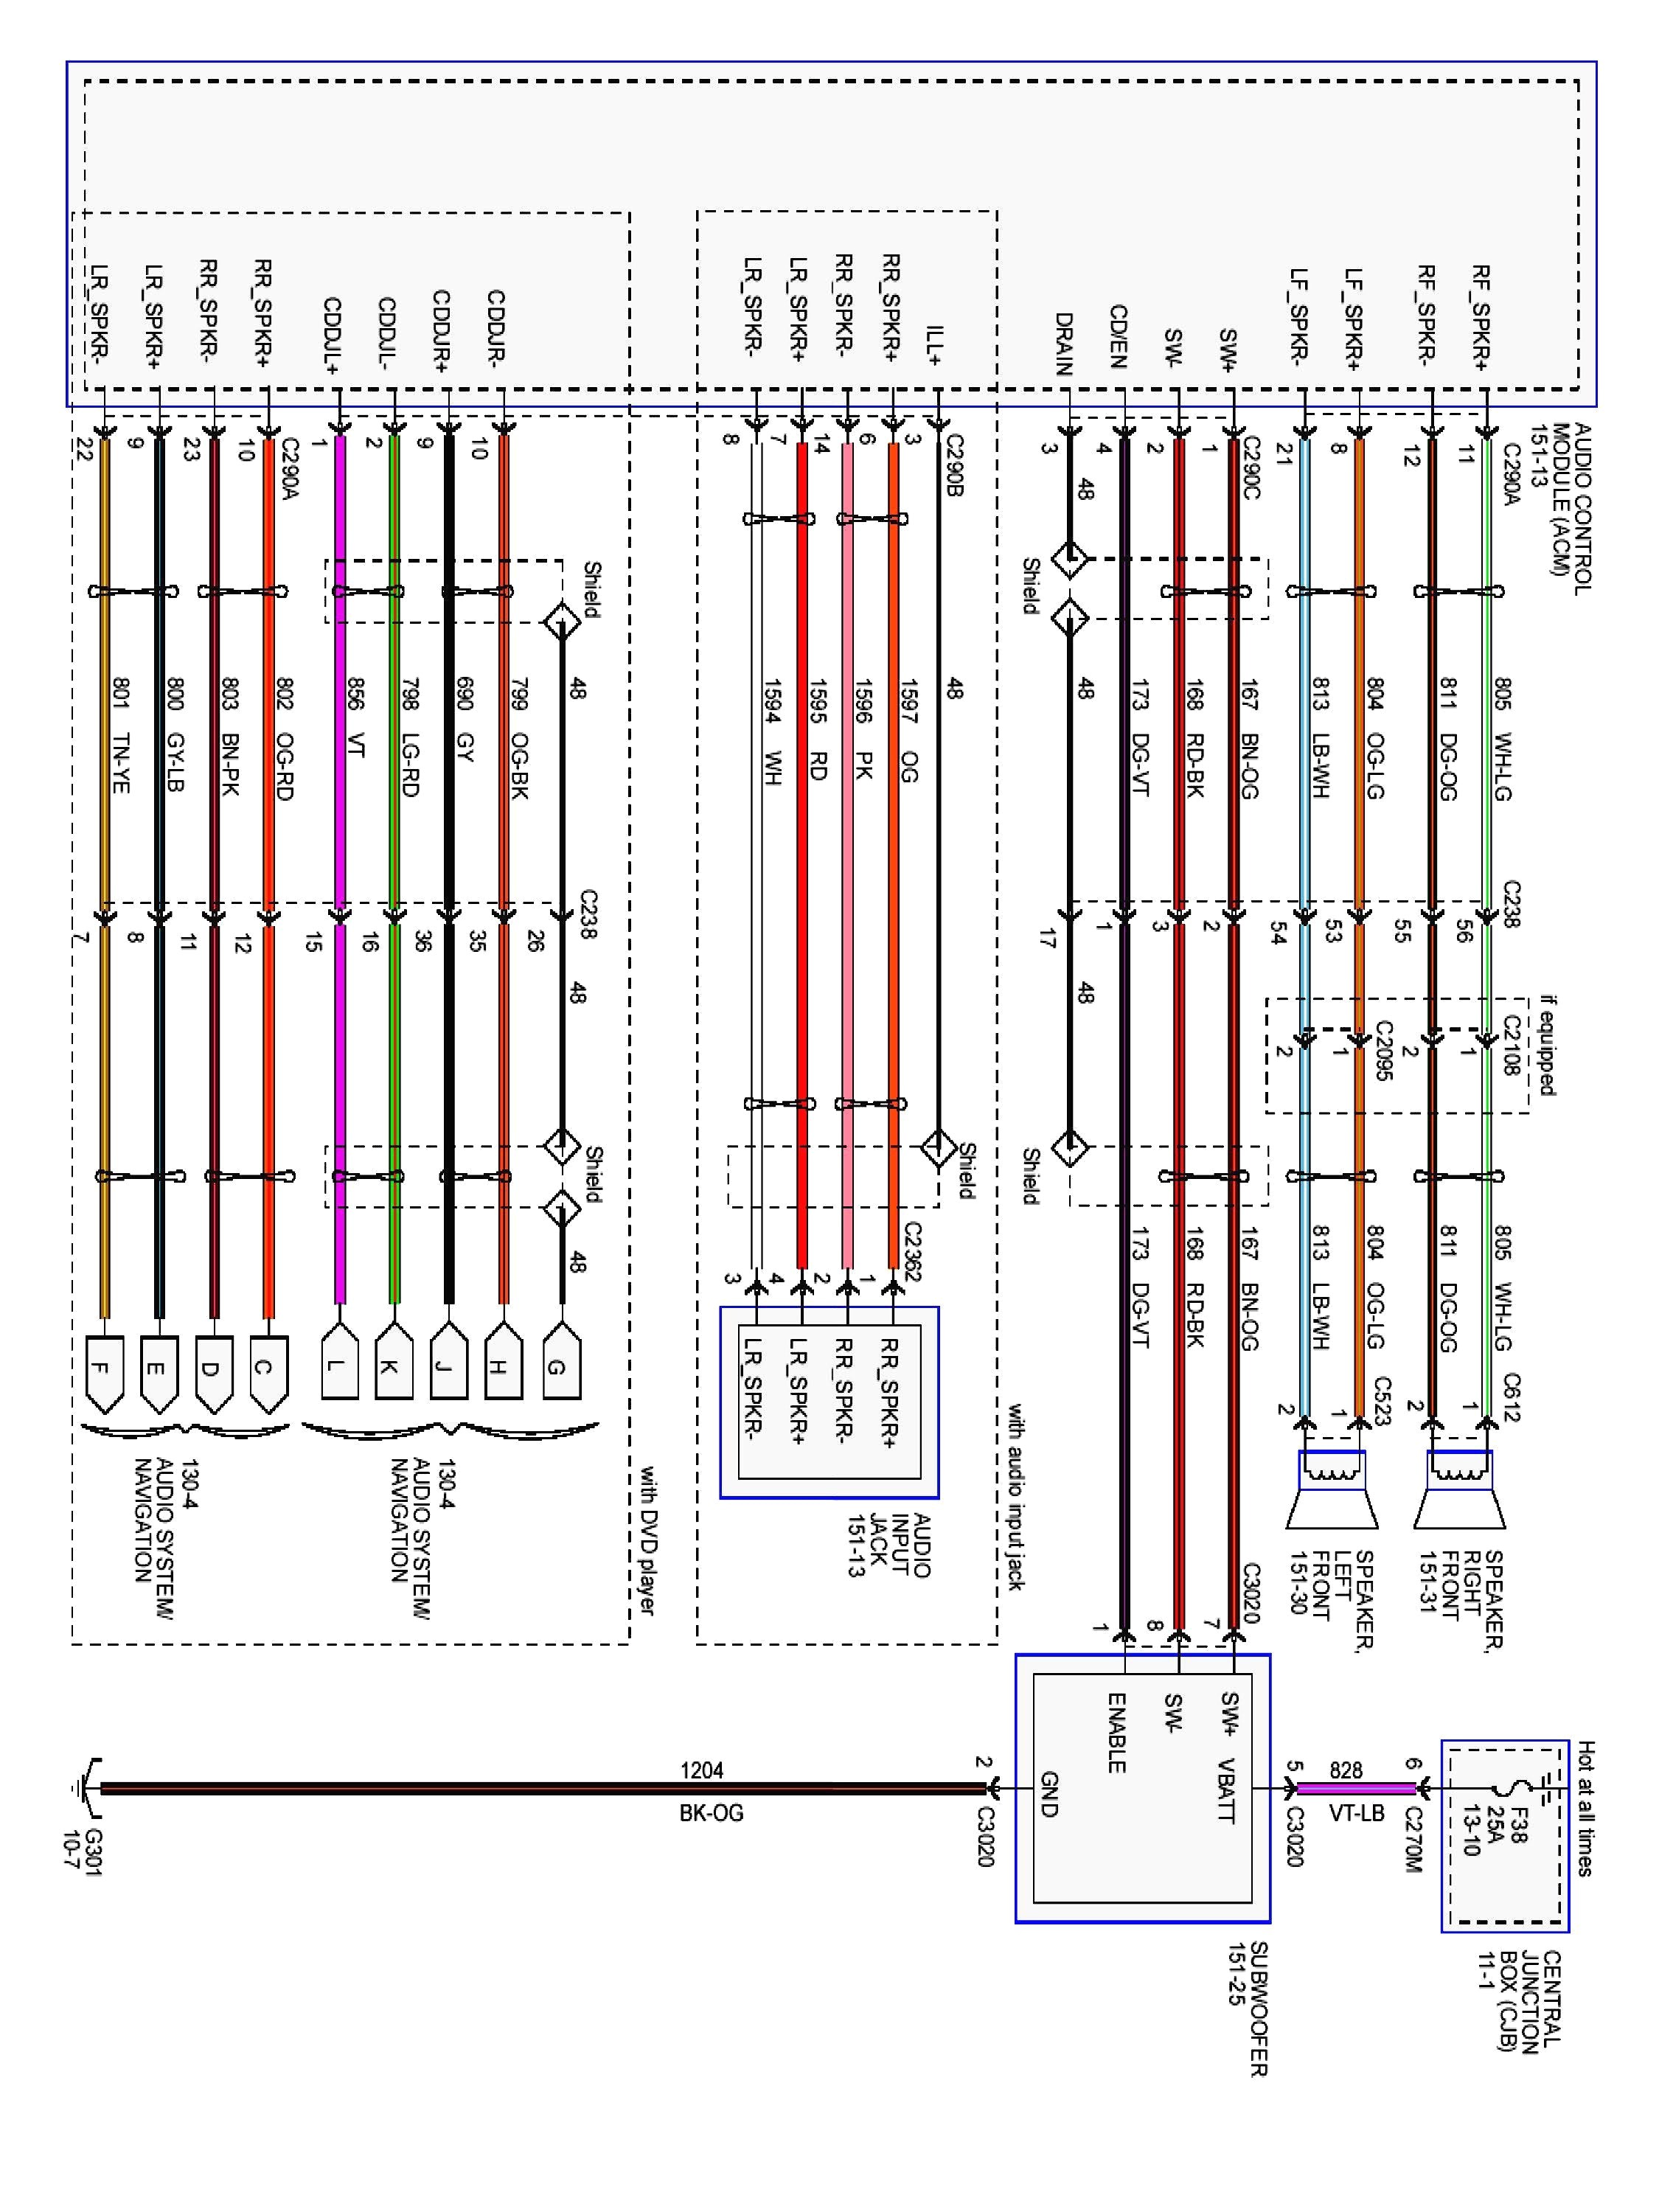 2002 Nissan Frontier Radio Wiring Diagram 1990 Ford Ranger For Vz4z1cg Jpg Pleasing Sound System With